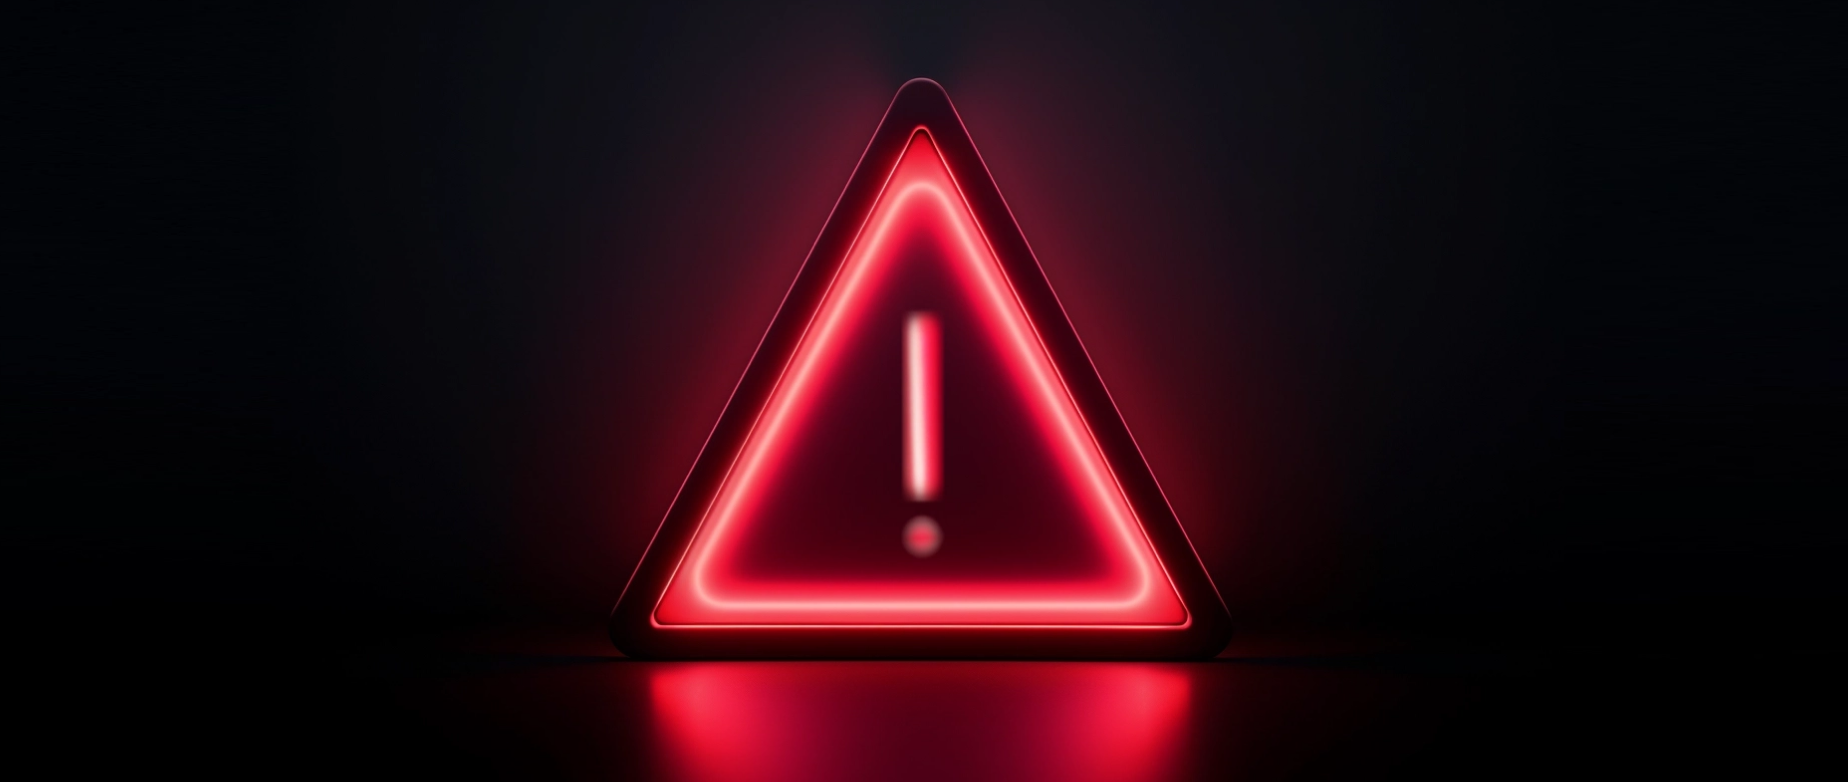 A red lit up warning light with a triangle and exclamation point on a black background.